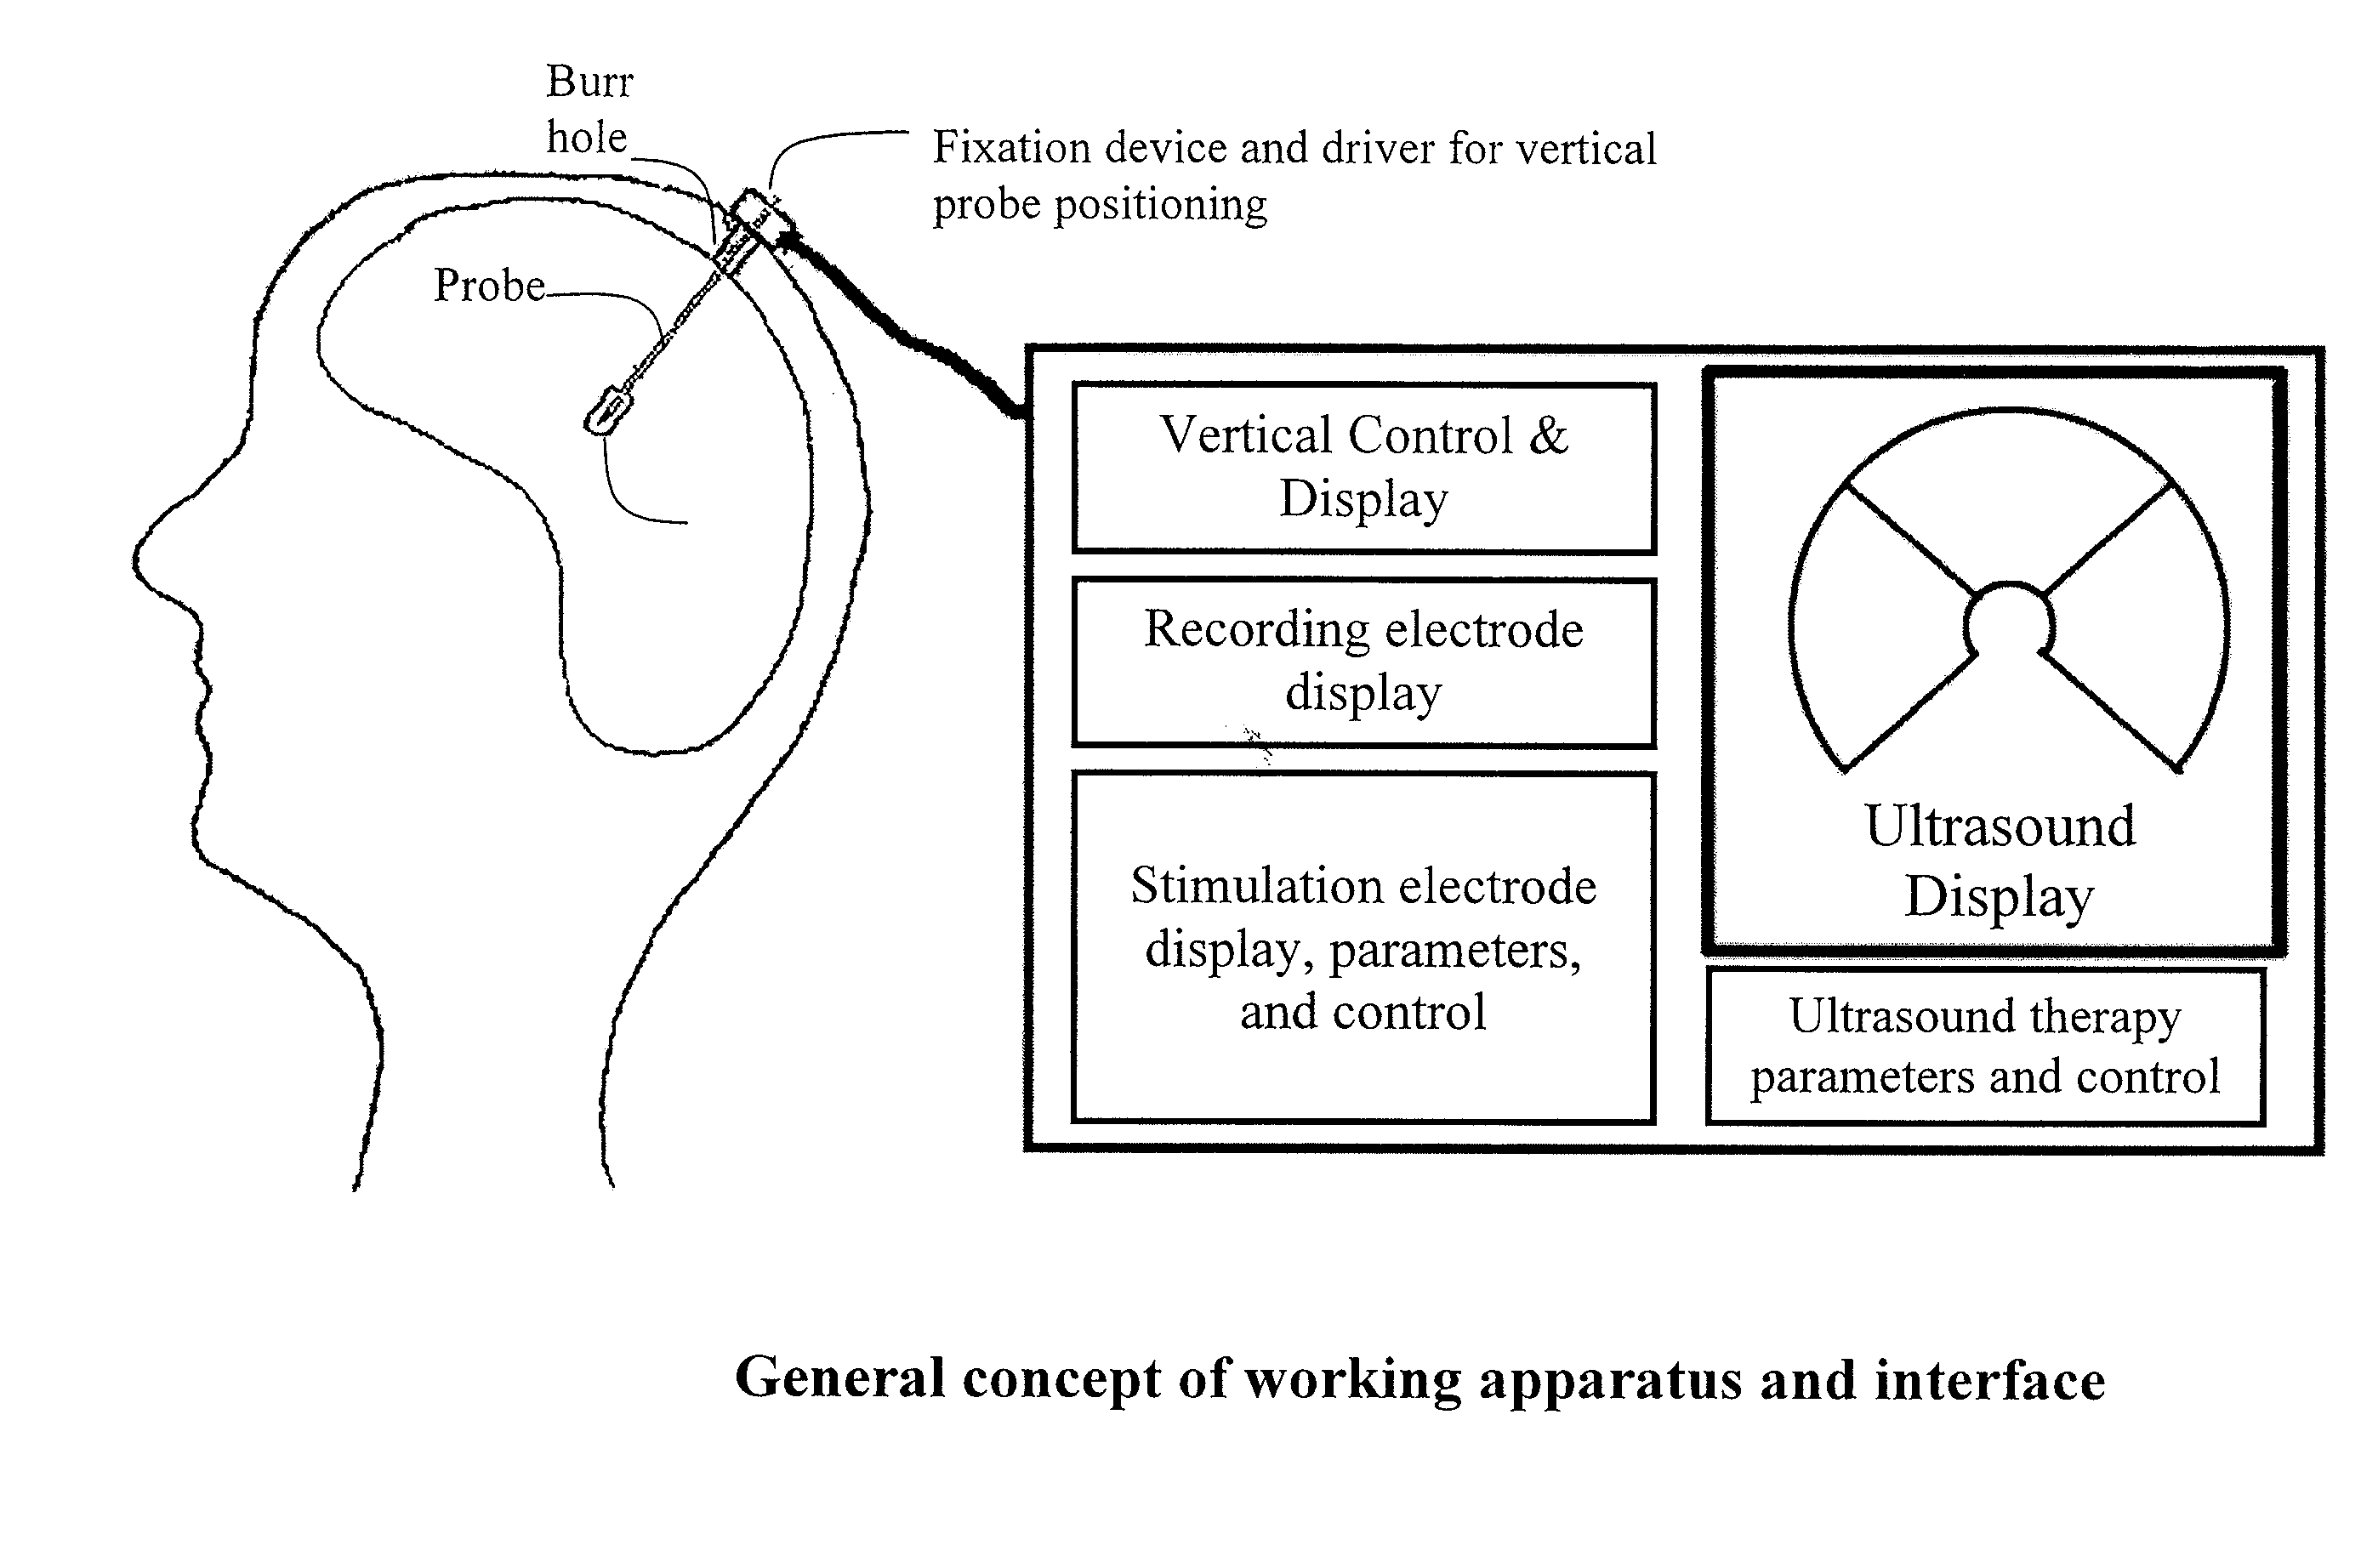 Hybrid ultrasound/electrode device for neural stimulation and recording